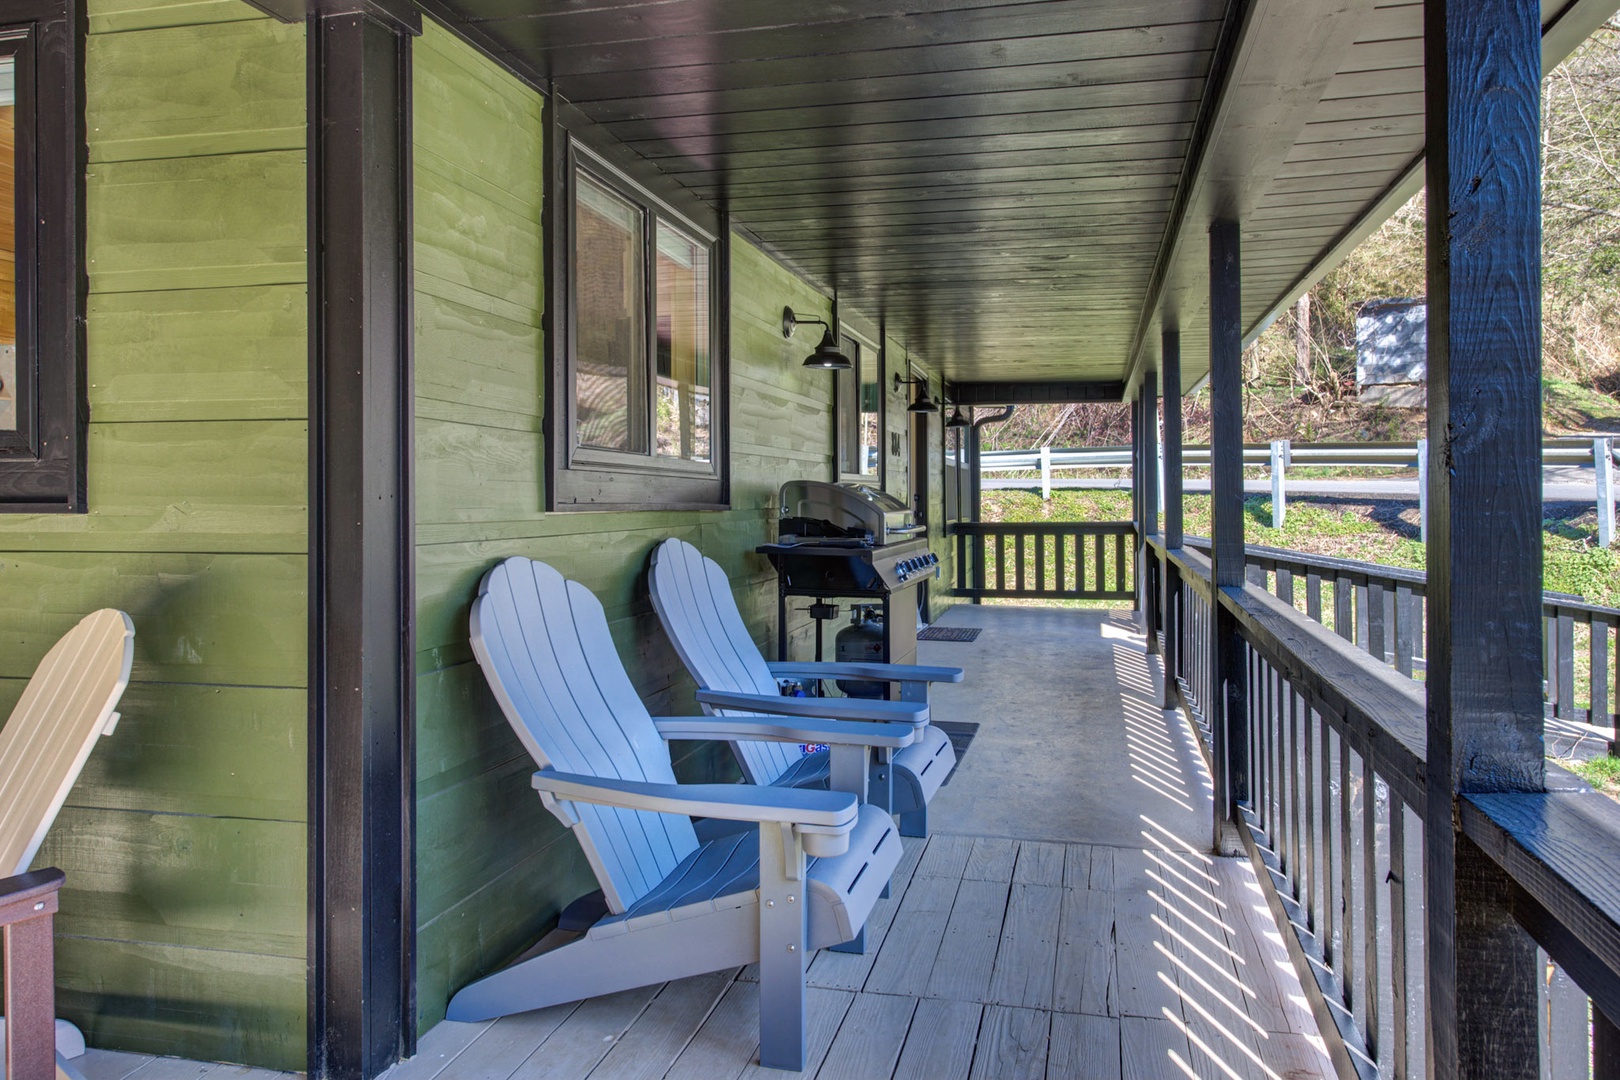 Our charming deck awaits you for leisurely afternoons in Adirondack chairs